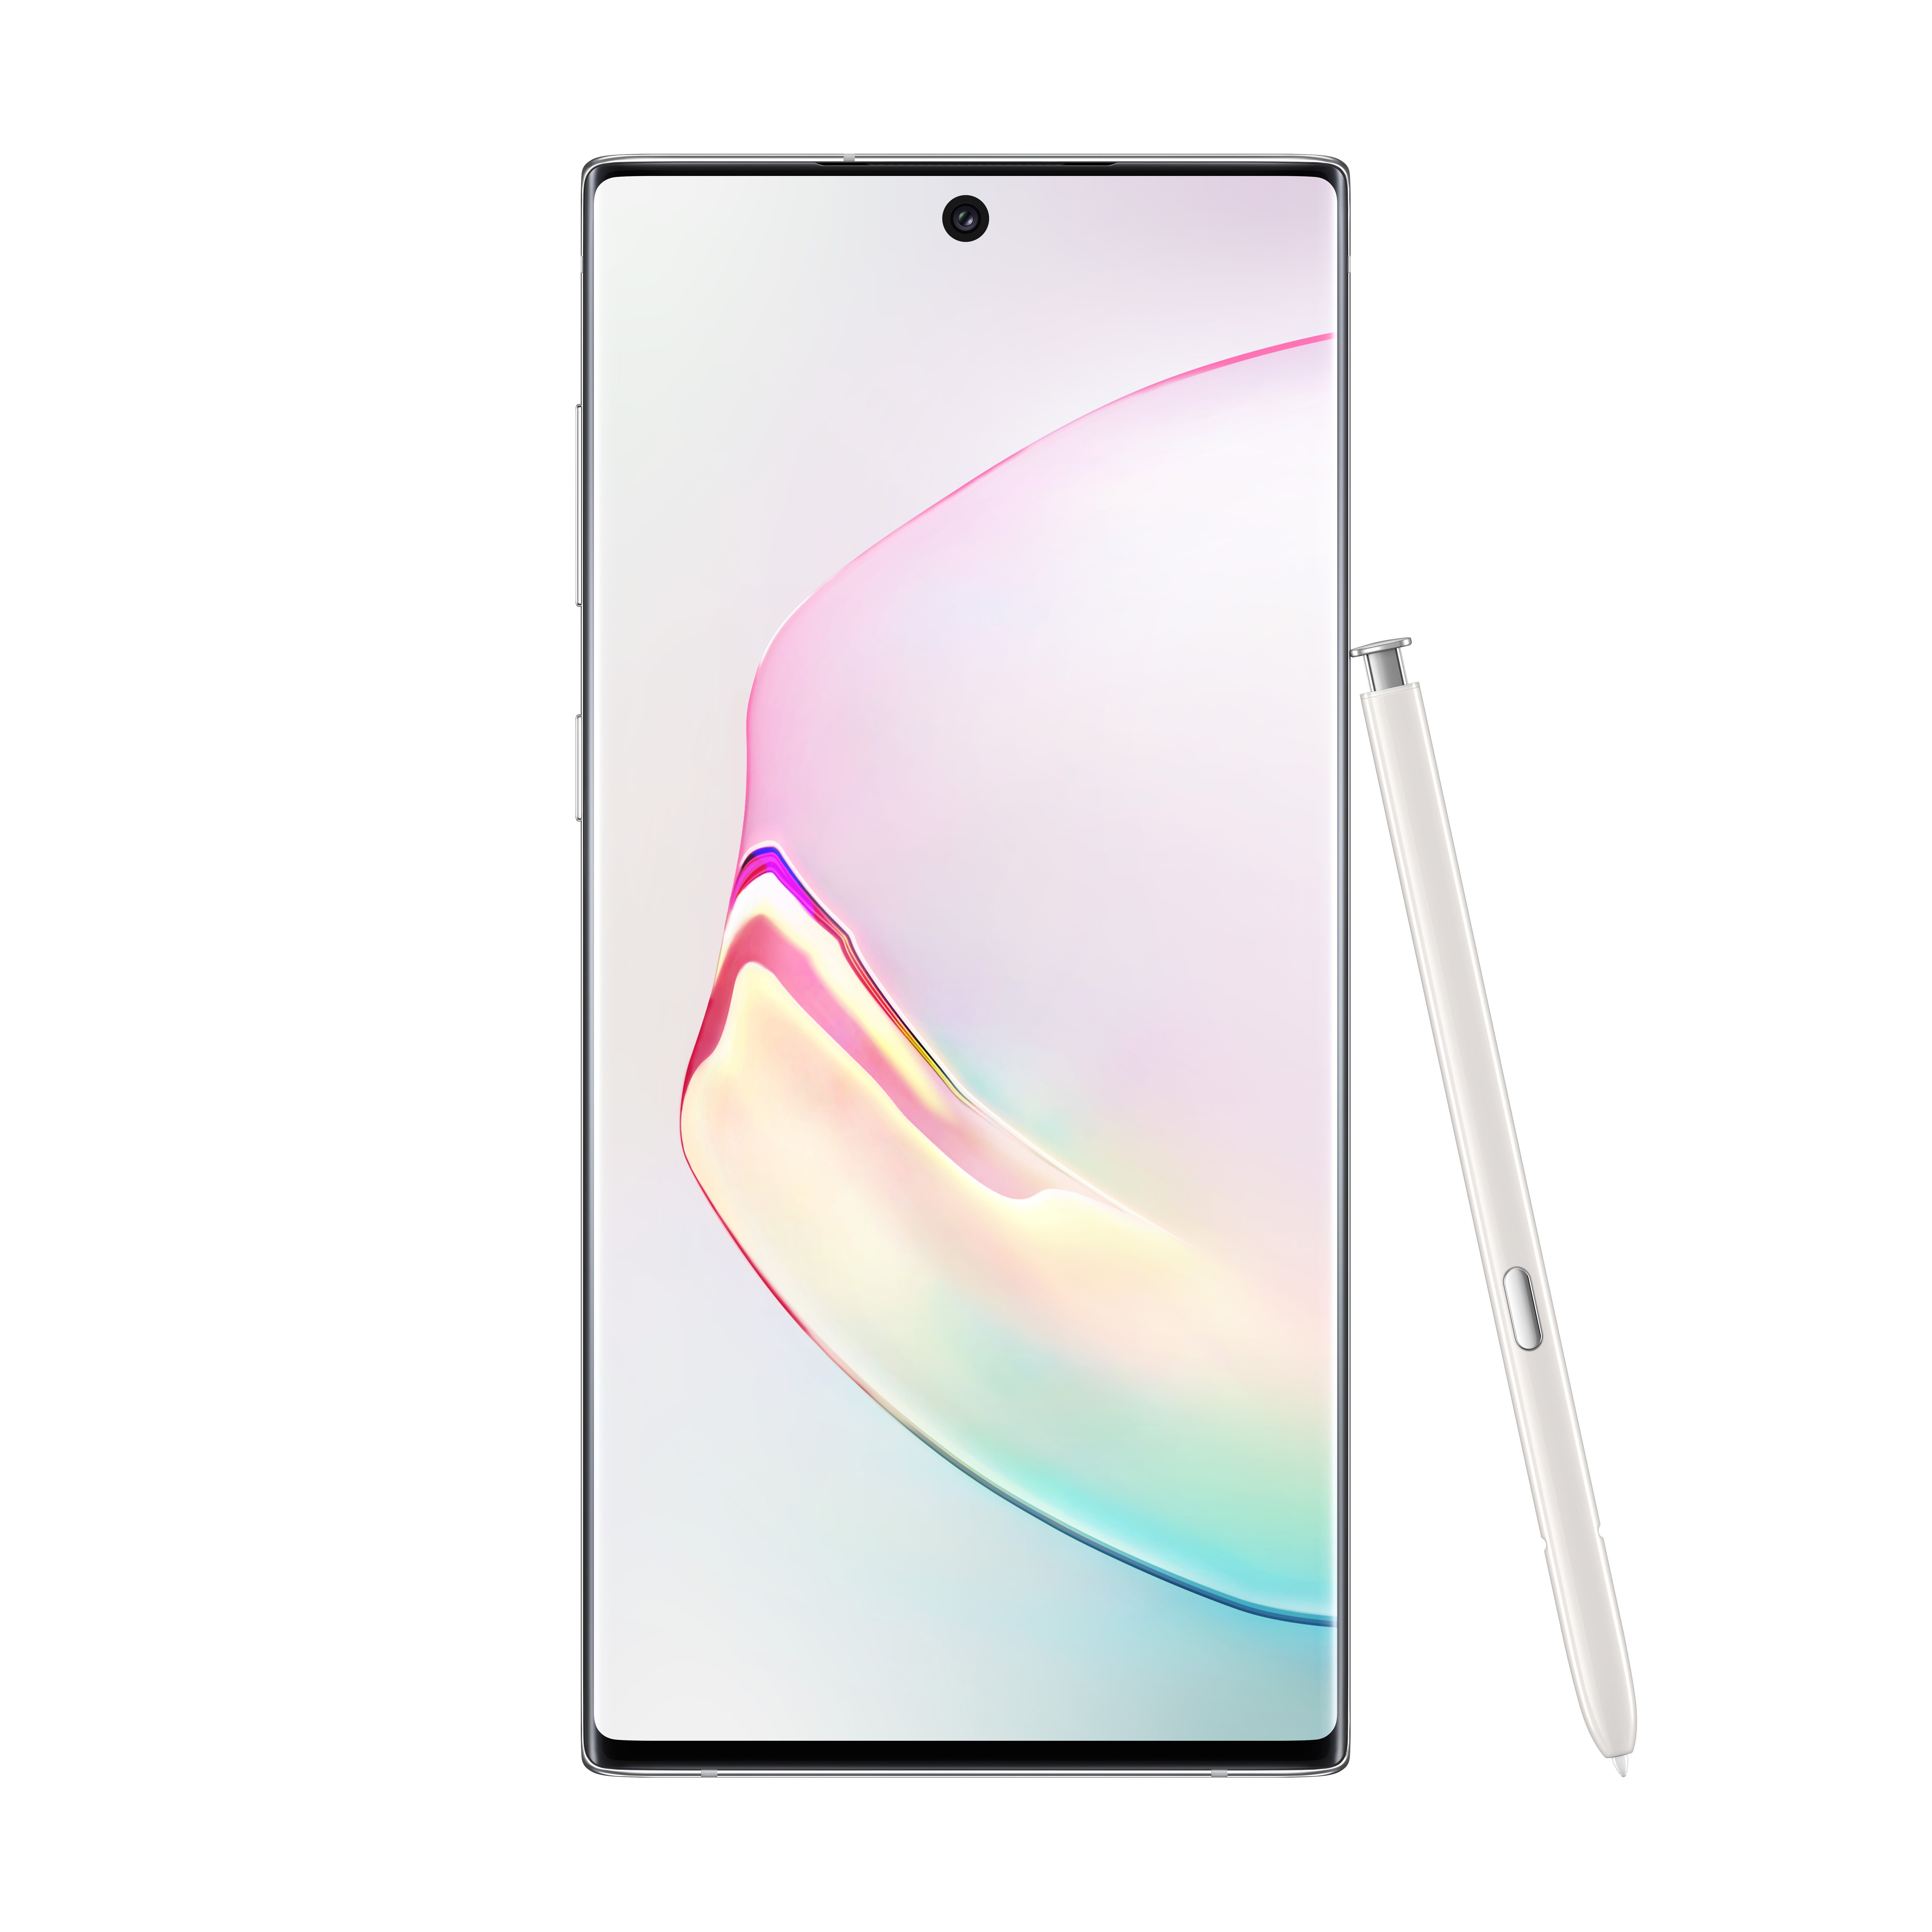 Samsung Galaxy Note 10 Plus Review: Power Of The Pen And Much More